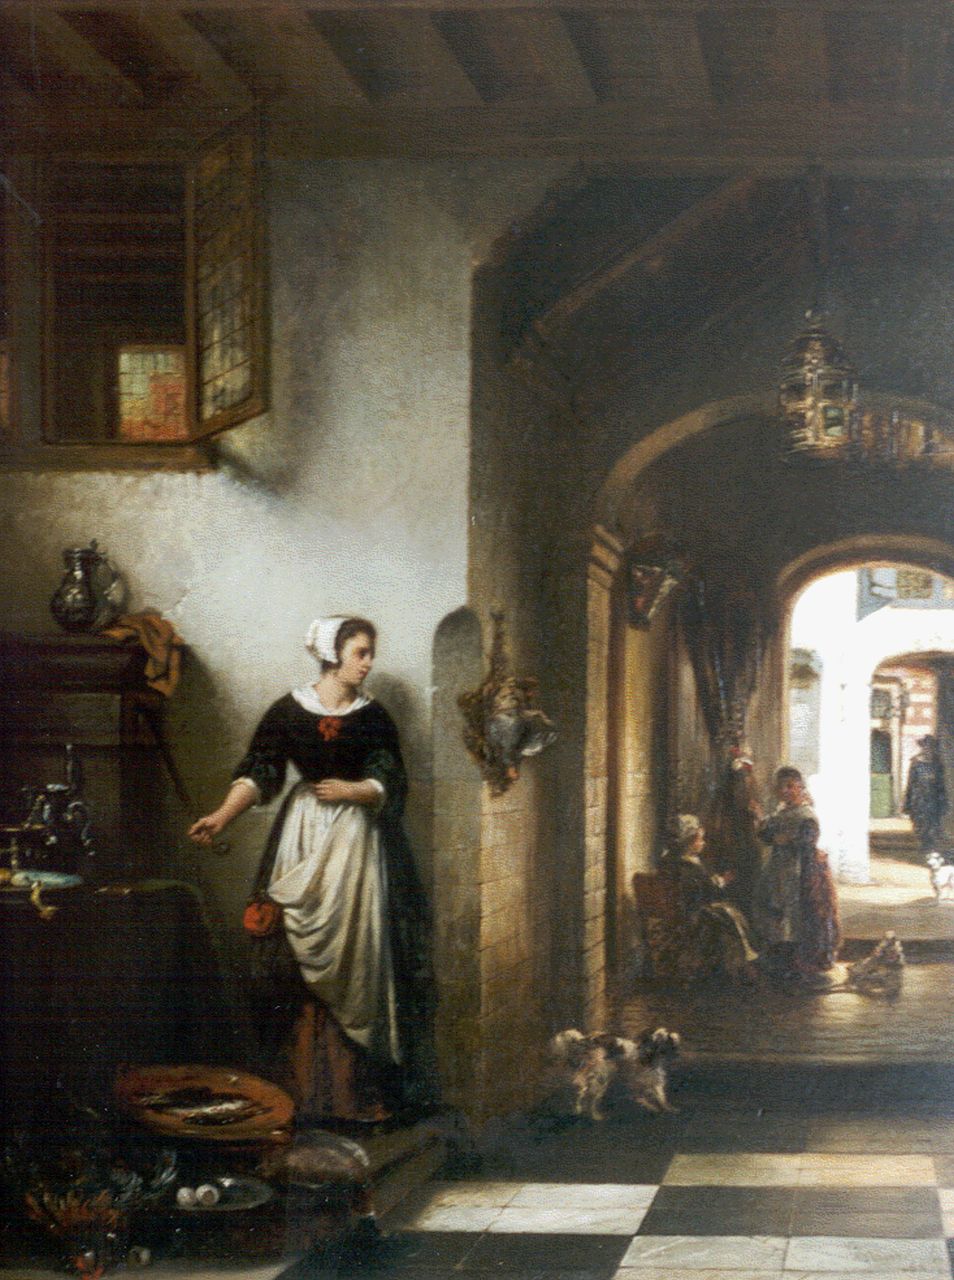 Stroebel J.A.B.  | Johannes Anthonie Balthasar Stroebel, Figures in a Dutch interior, oil on panel 54.7 x 41.9 cm, signed l.r. and dated '66